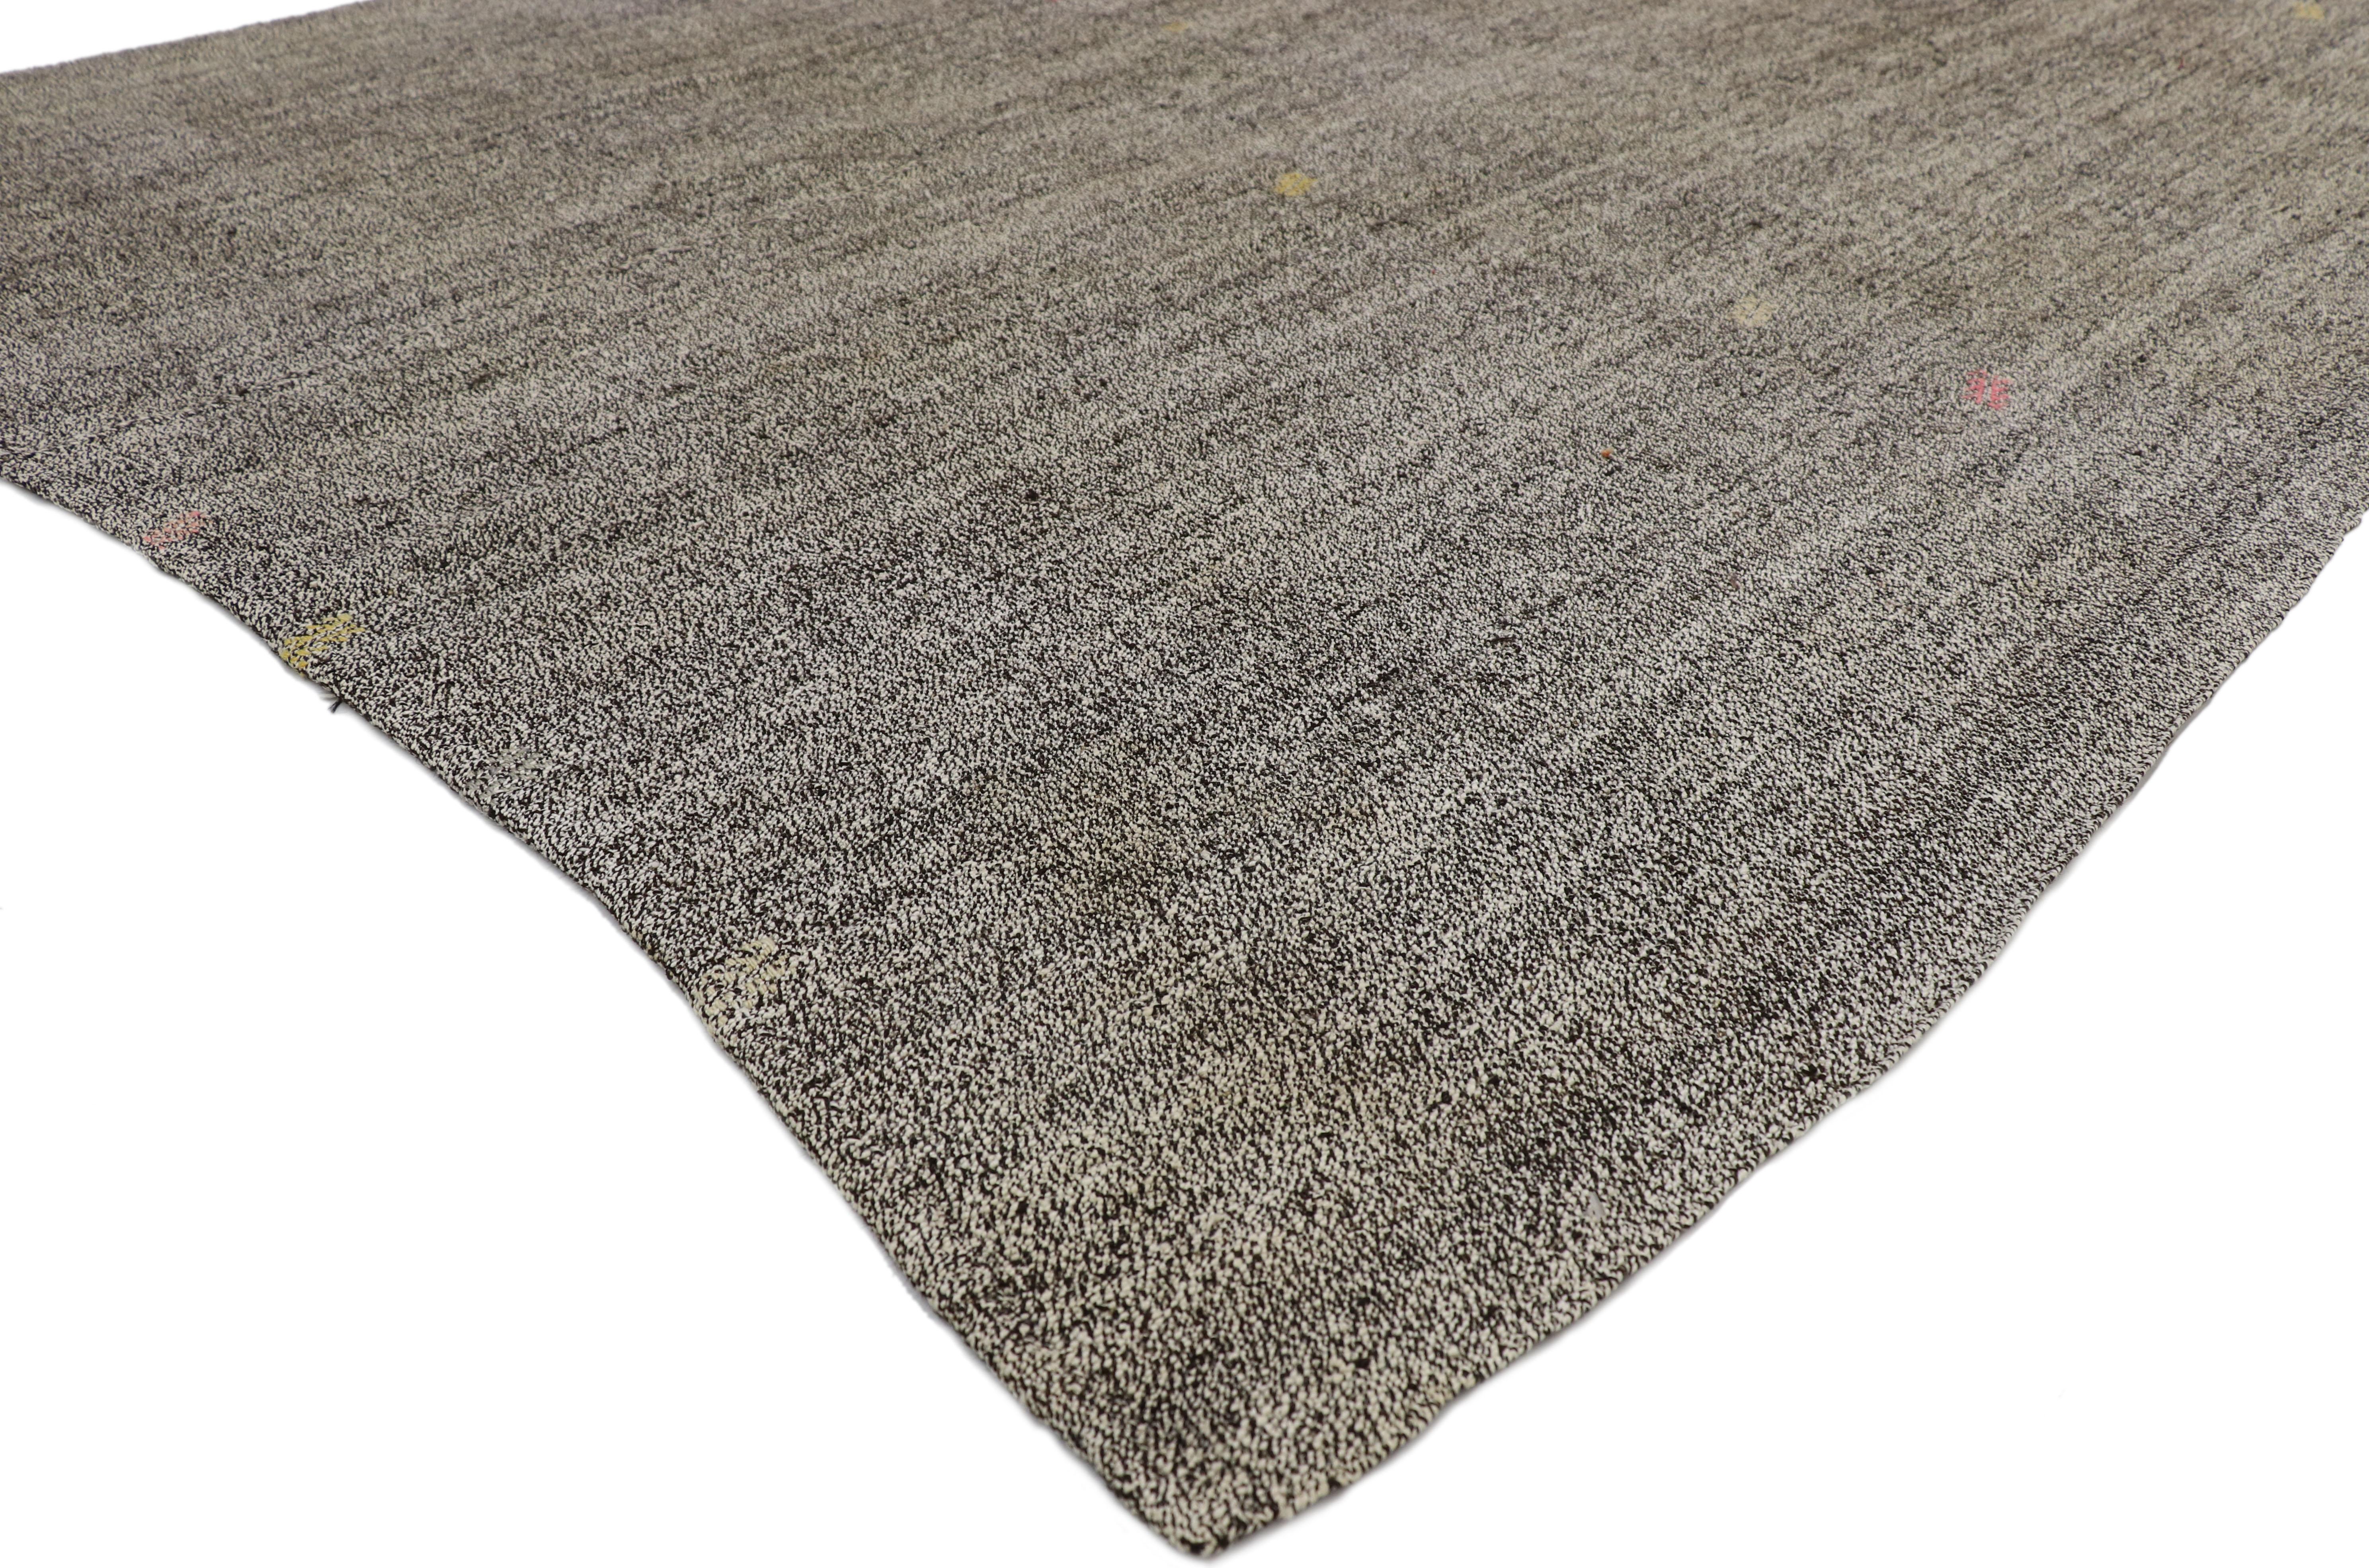 74130 Vintage Turkish Flat-weave Kilim Rug with Boho Modern Industrial Design. This vintage Turkish Kilim rug is a beautiful marriage of modern Industrial and fresh, contemporary form.Natural wool with goat hair and hemp striations shapes the colors